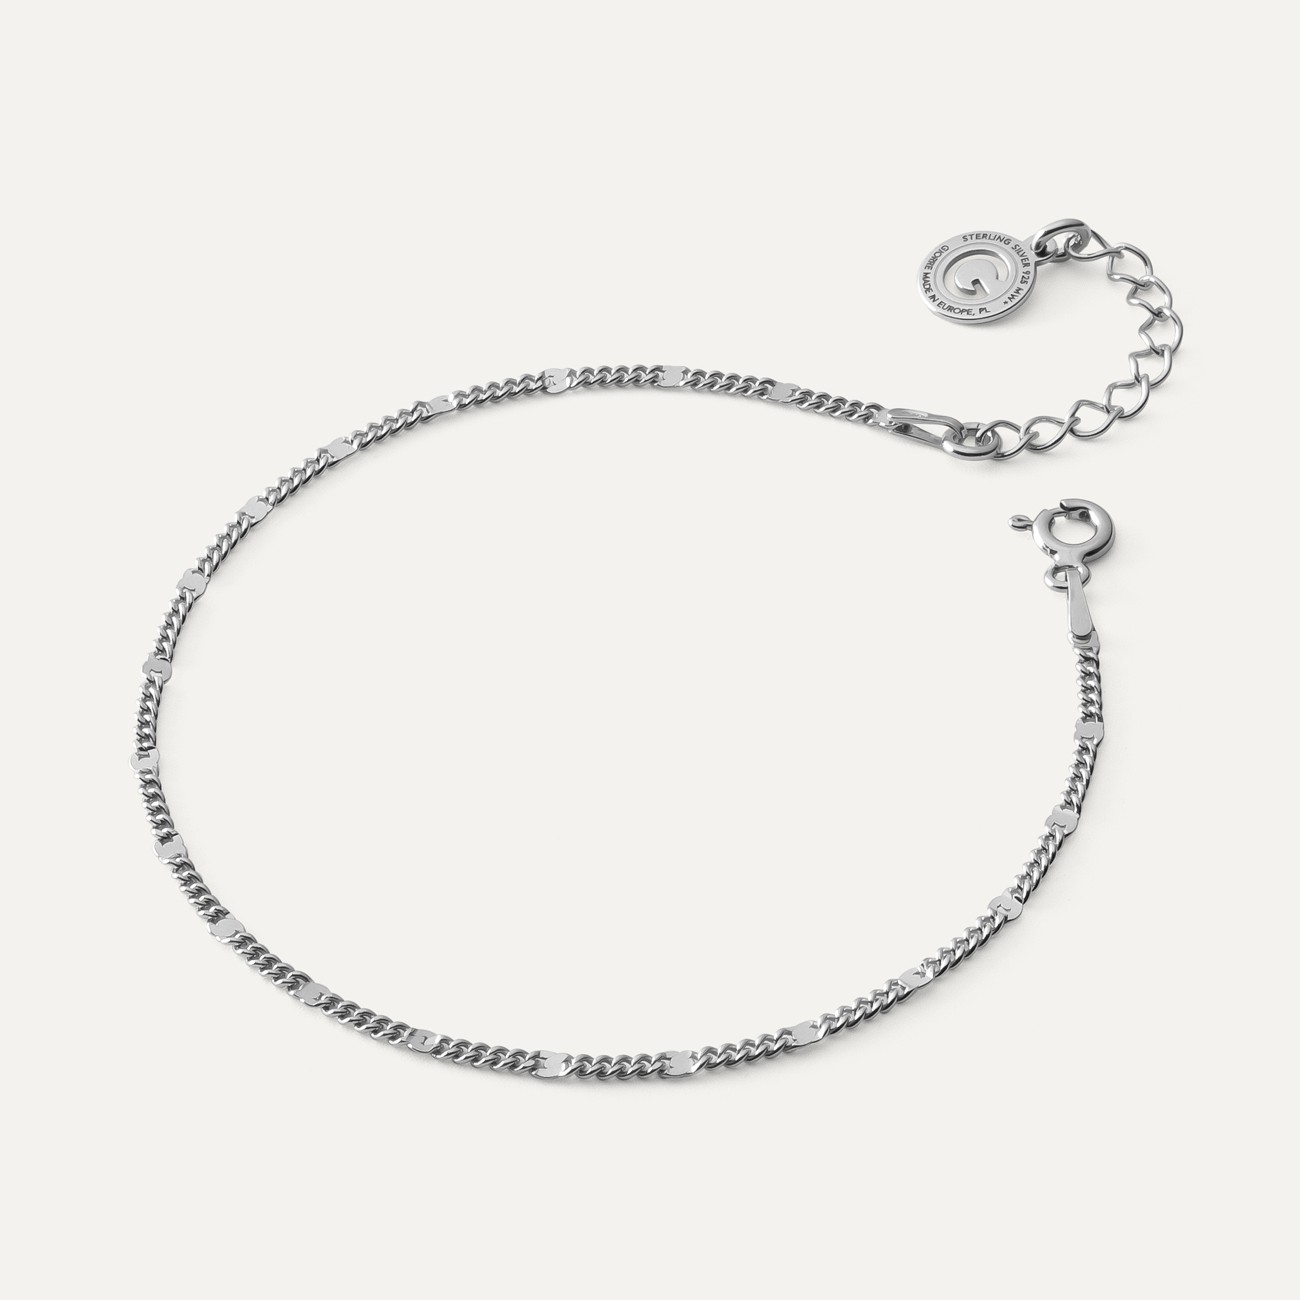 Delicate armor bracelet chain with plates, sterling silver 925